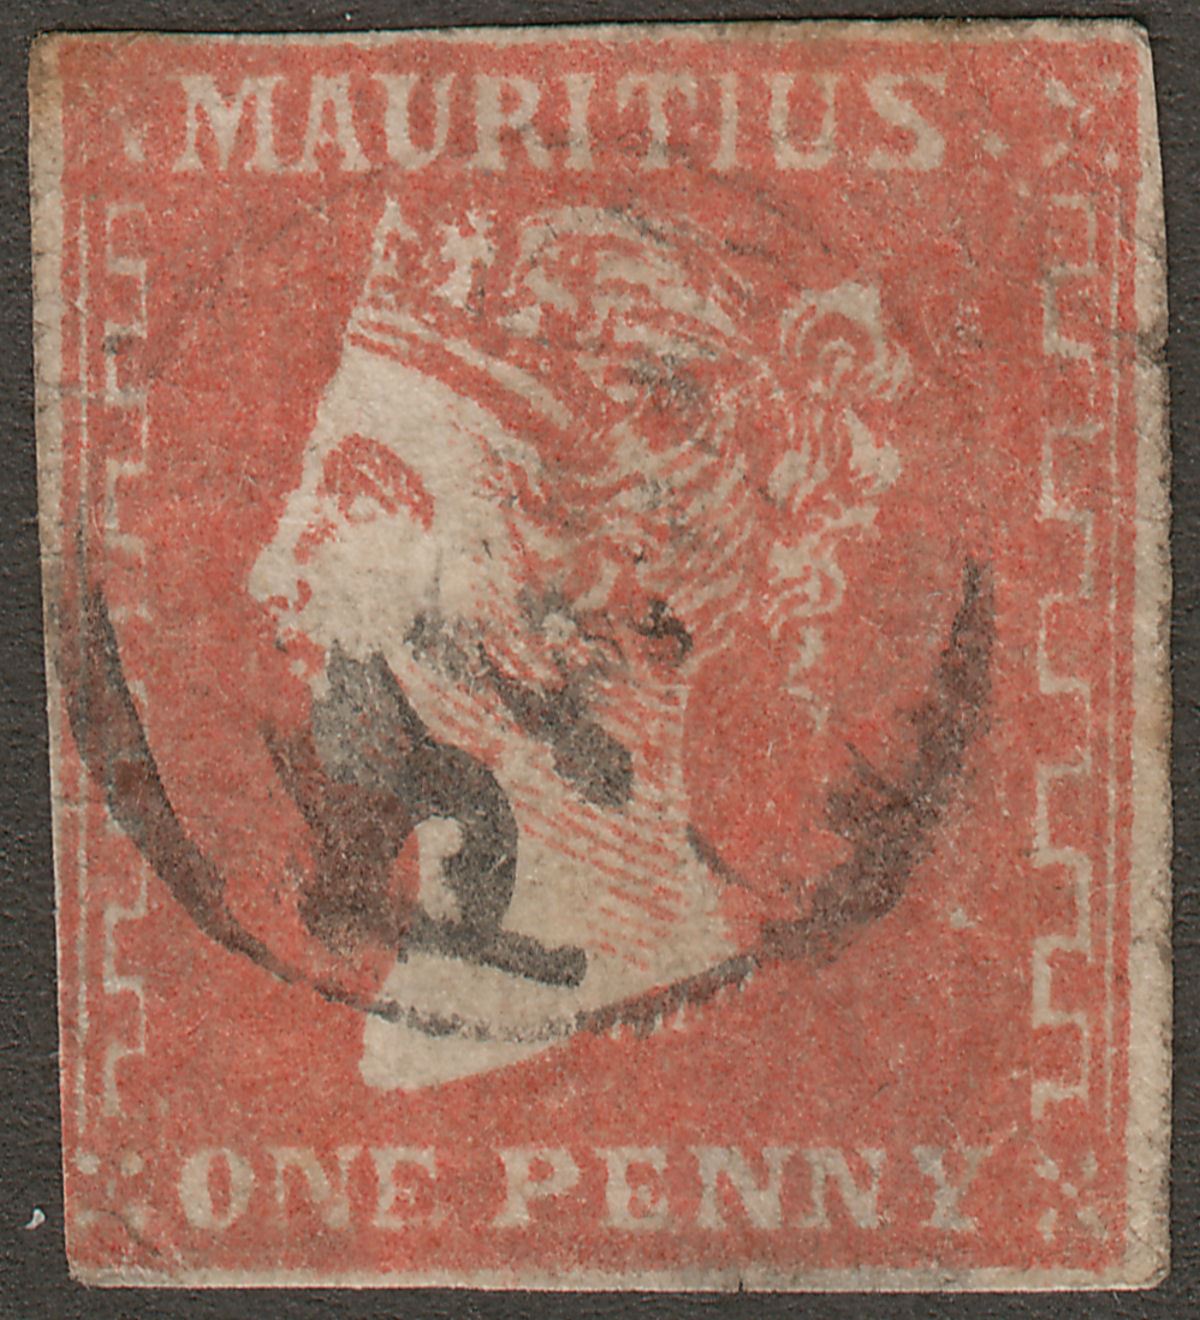 Mauritius 1859 QV Dardenne 1d Dull Vermilion Imperf Used SG42 cat £1400 thinned